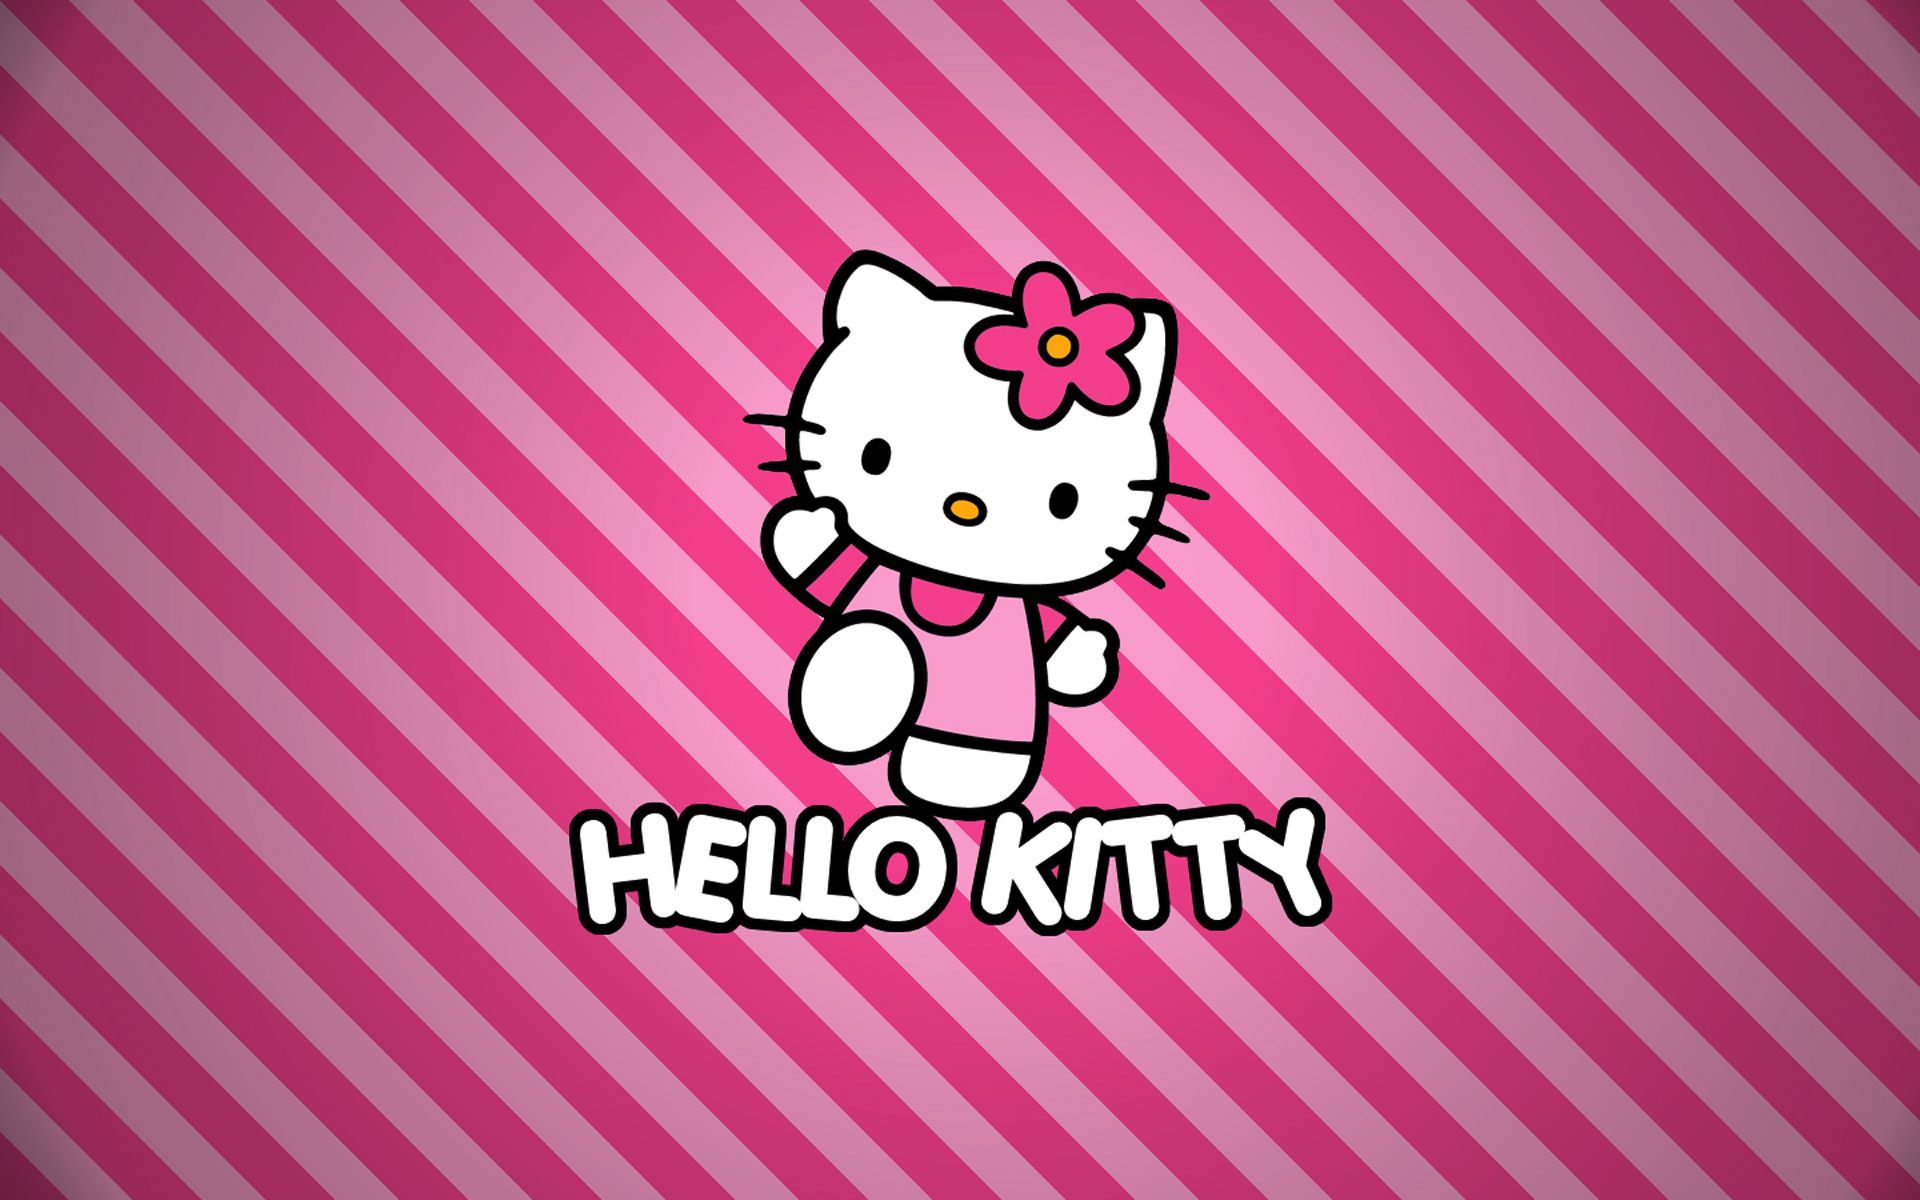 Wallpapers Fre: Pink Background Hello Kitty Wallpaper